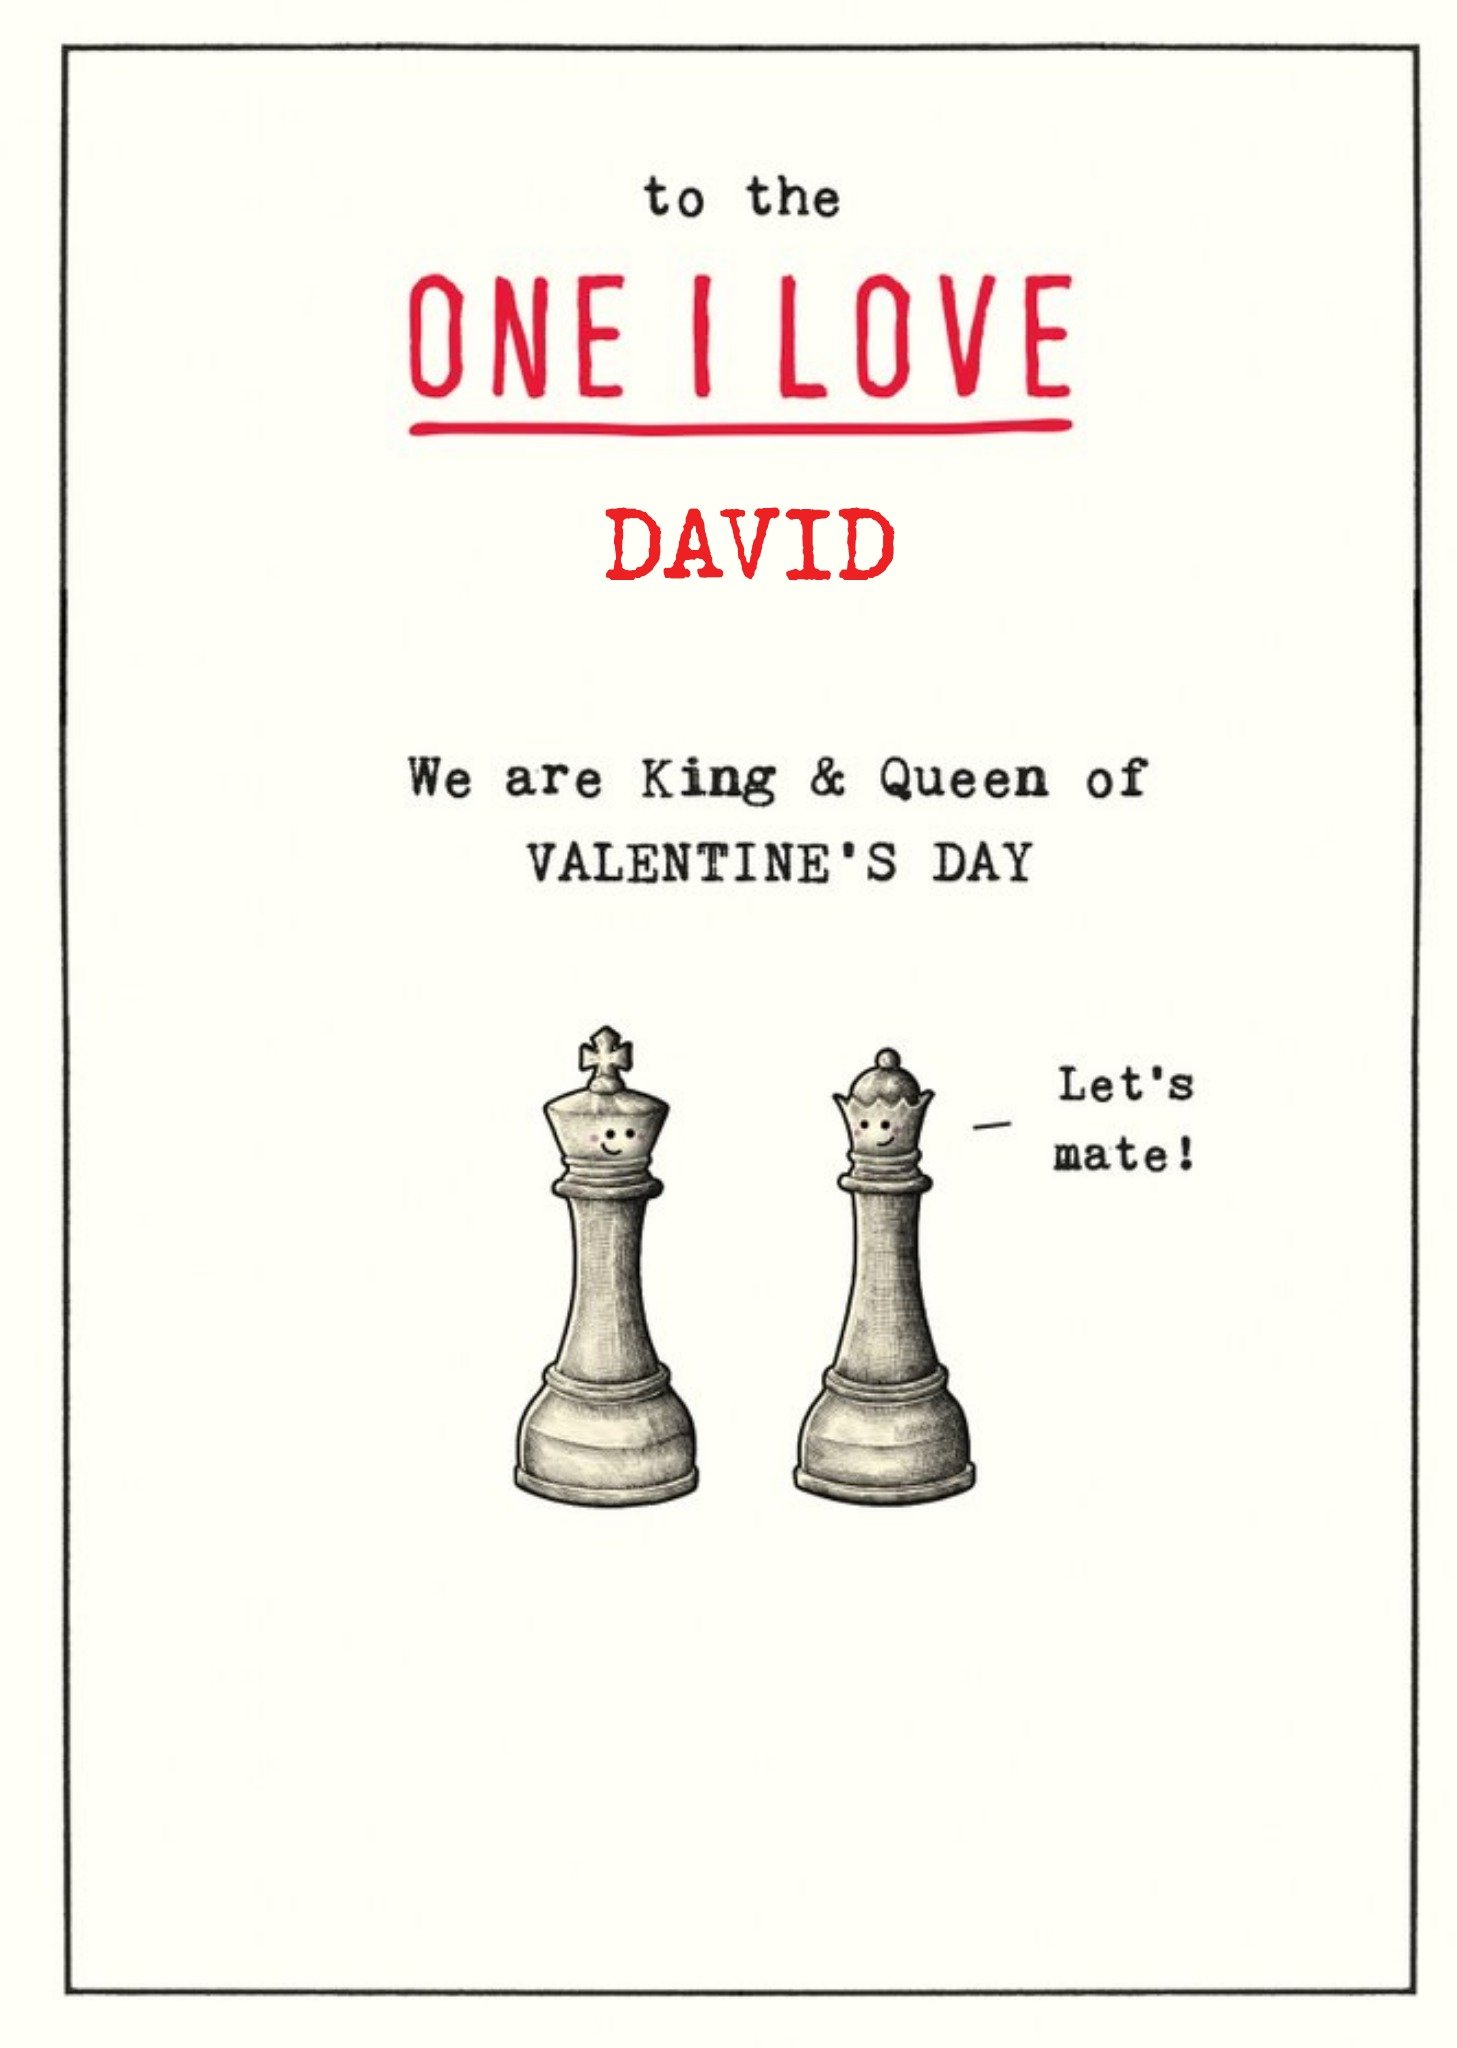 Moonpig Illustration Of King And Queen Chess Pieces Cheeky Pun Valentine's Day Card Ecard